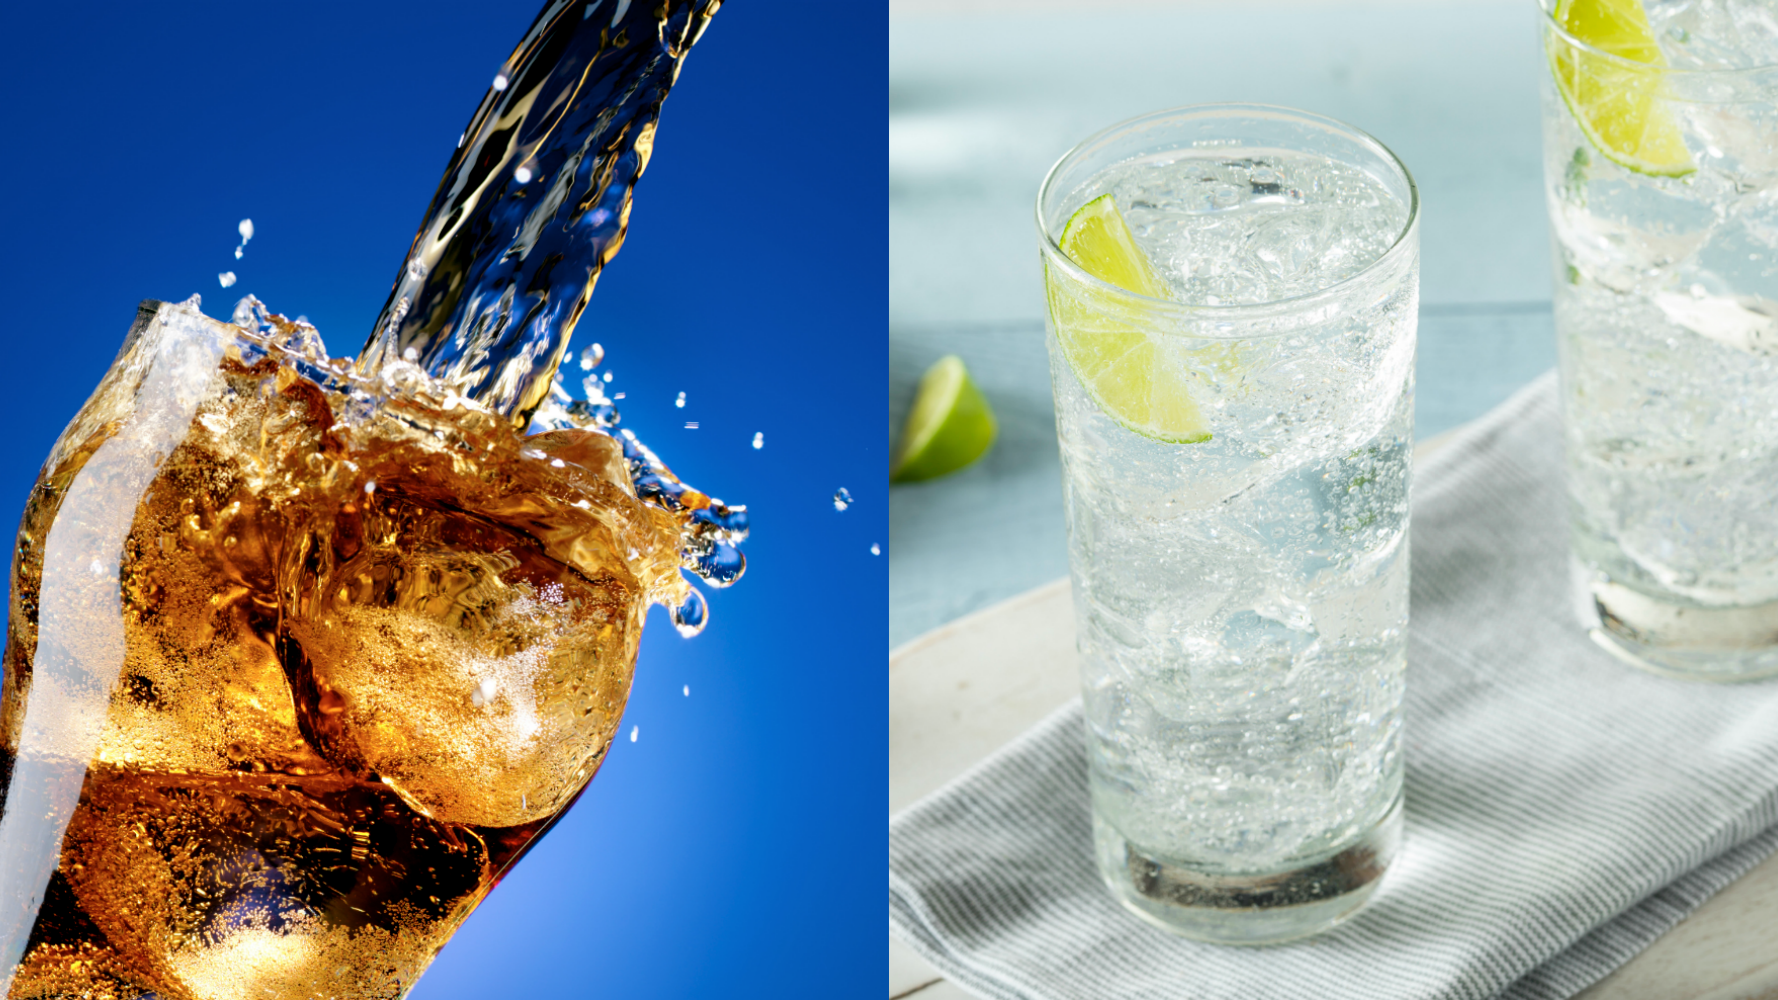 Does a glass of water ever go bad? Experts weigh in.